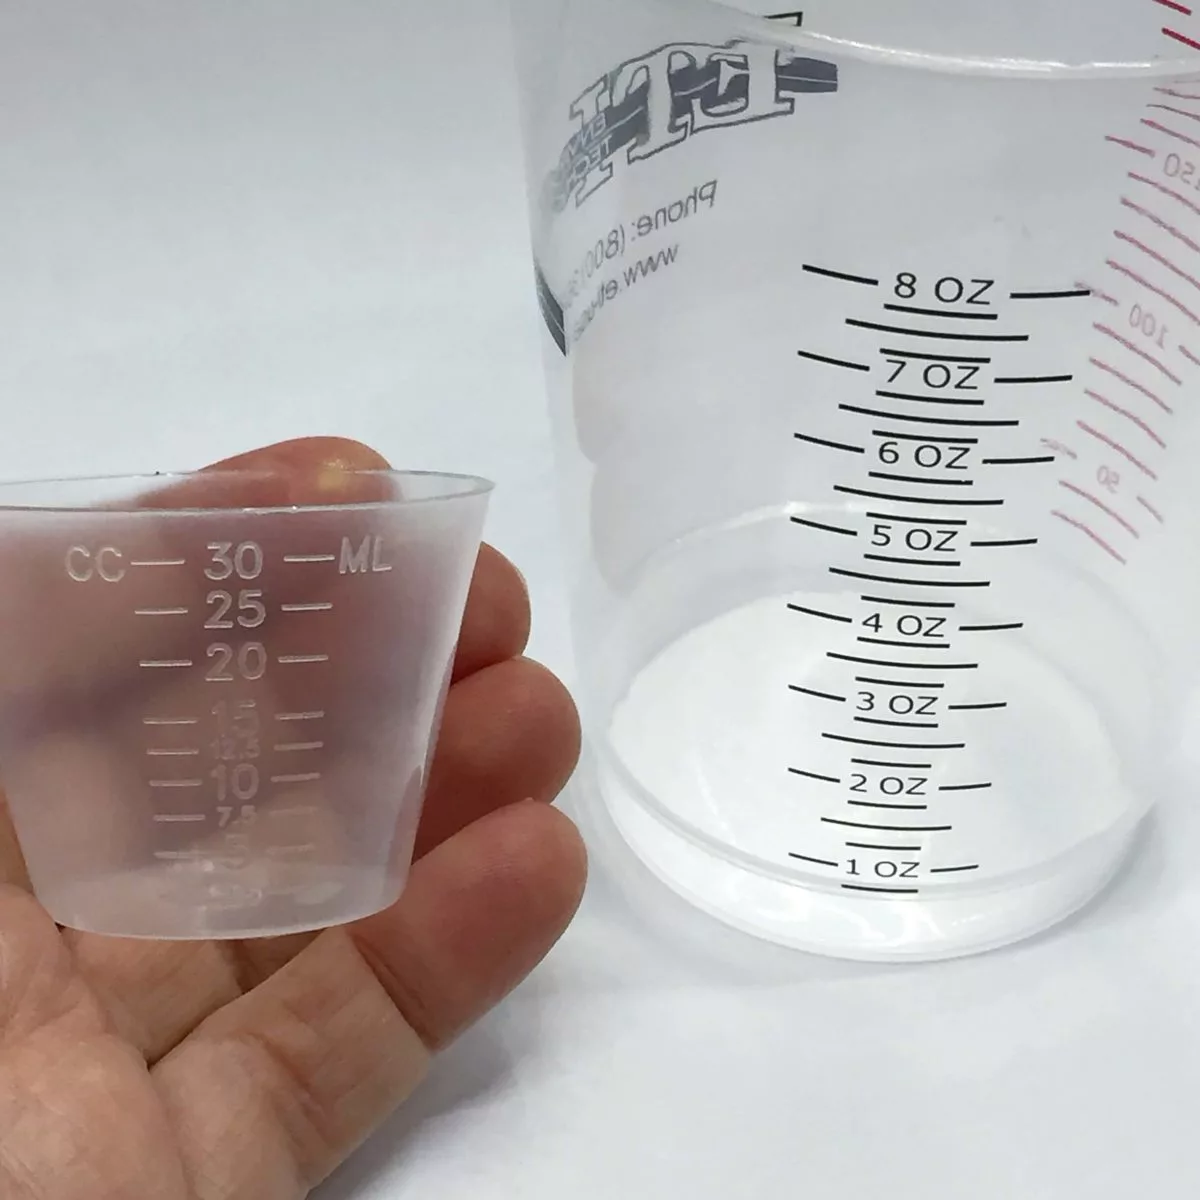 3 Easy Ways to Measure a 2:1 Ratio Resin